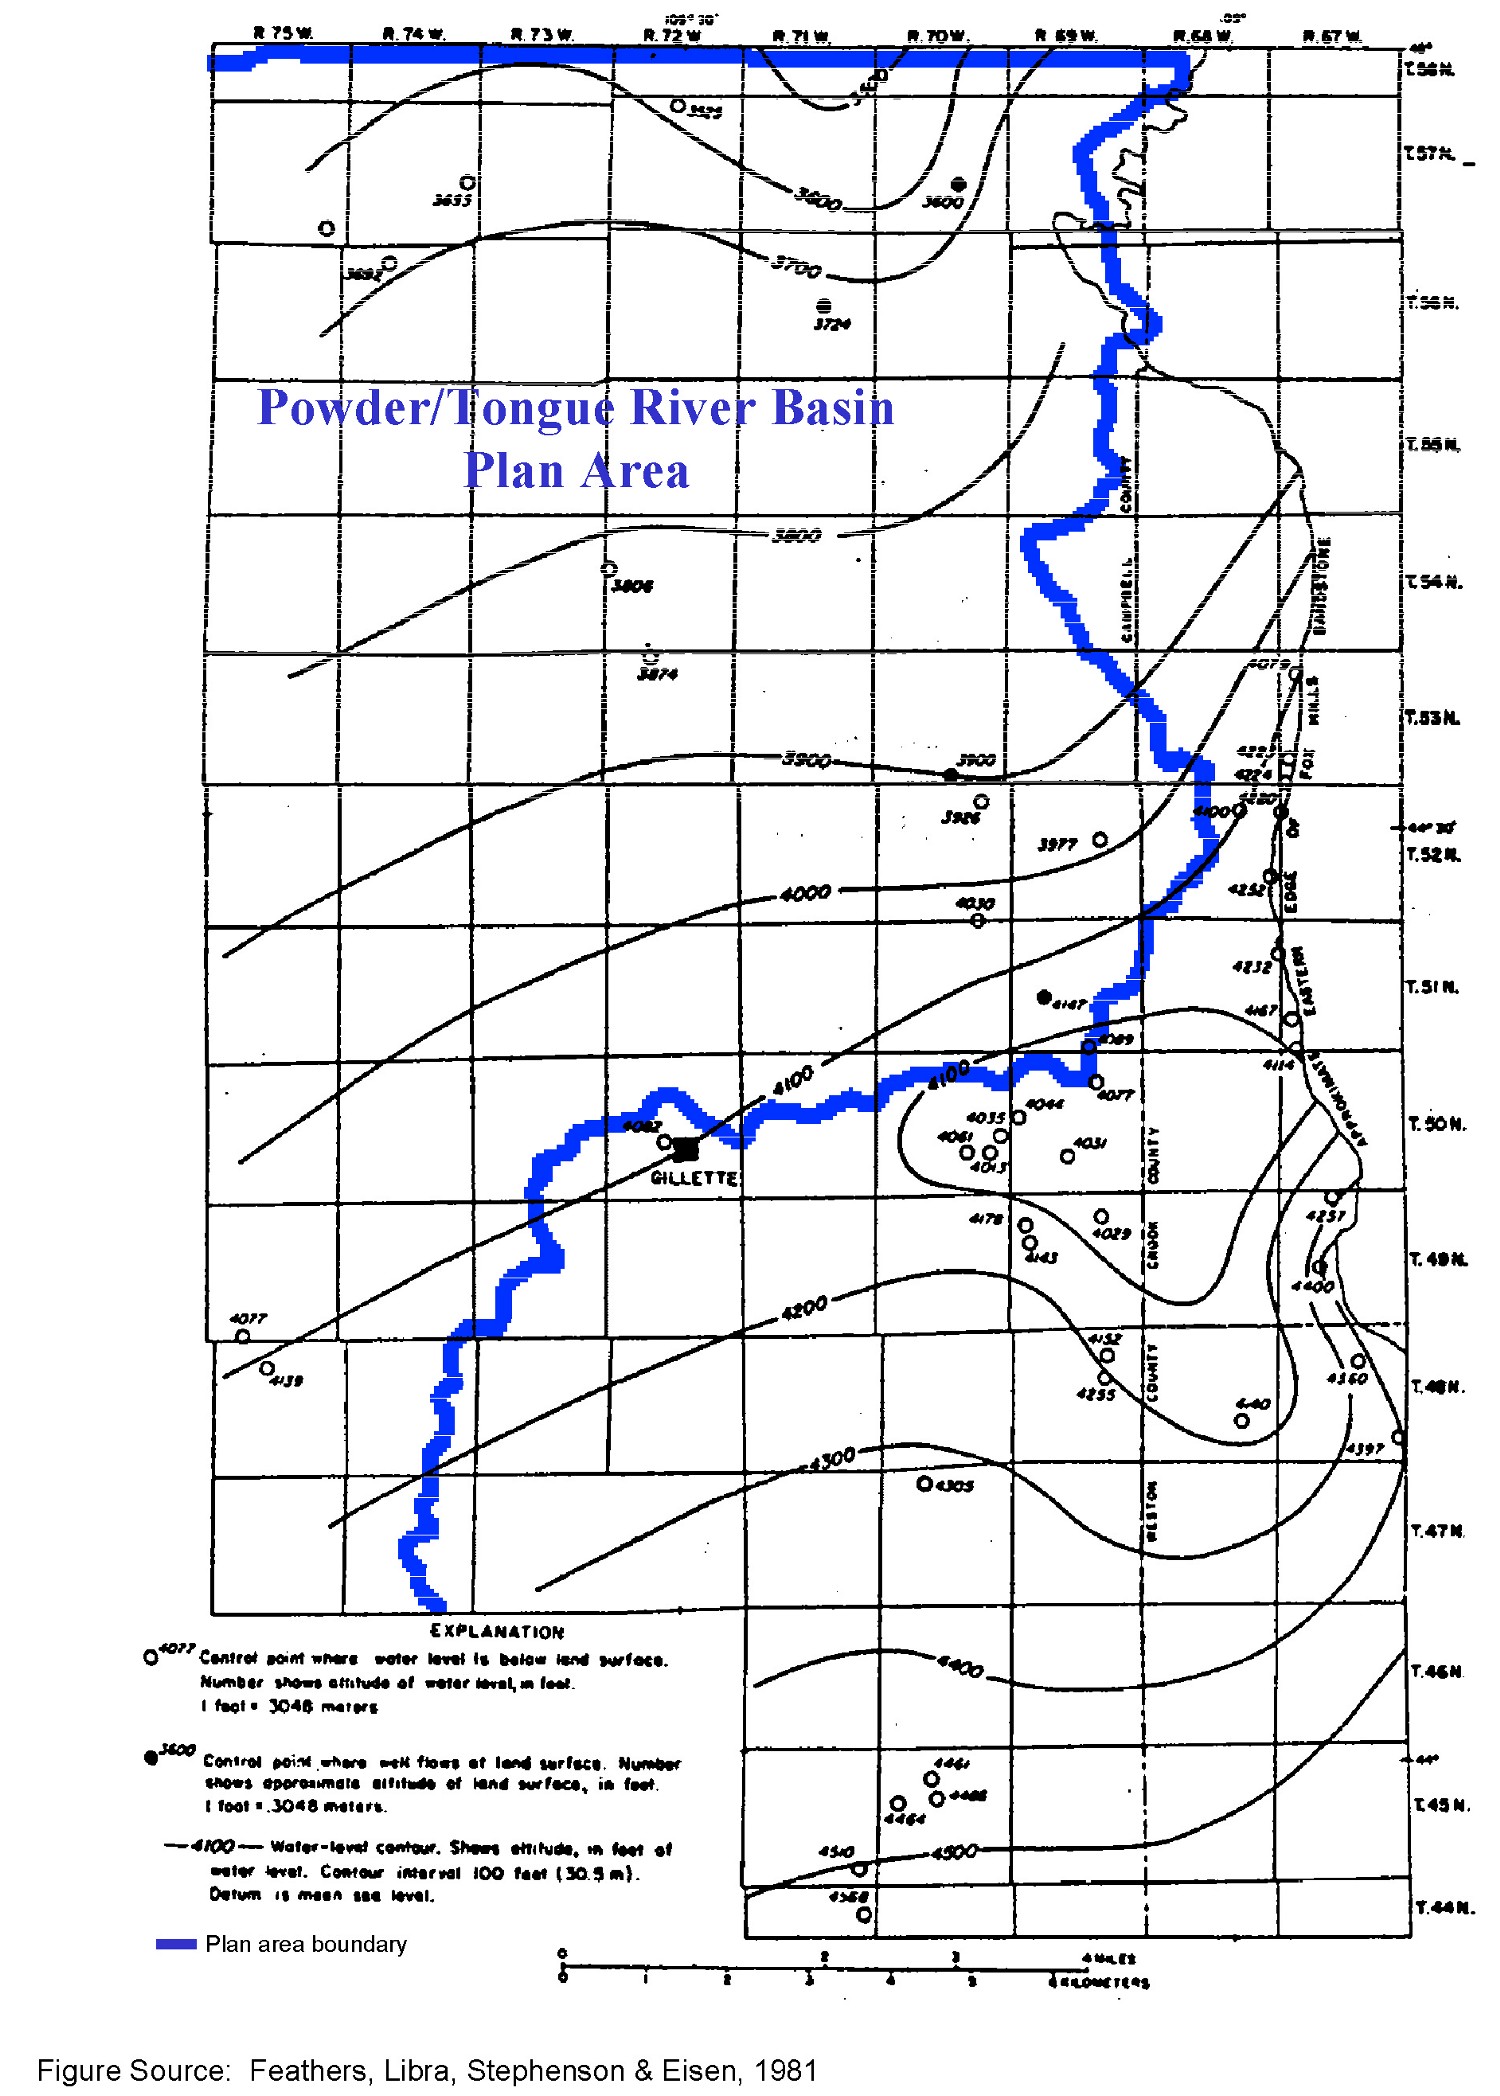 Contours on Water Levels in Wells Finished in the Fox Hills Sandstone, Lance 
Formation, and Lower Part of the Fort Union Formation in the Gillette Area, Wyoming
(from Northern Great Plains Resource Program, 1974).